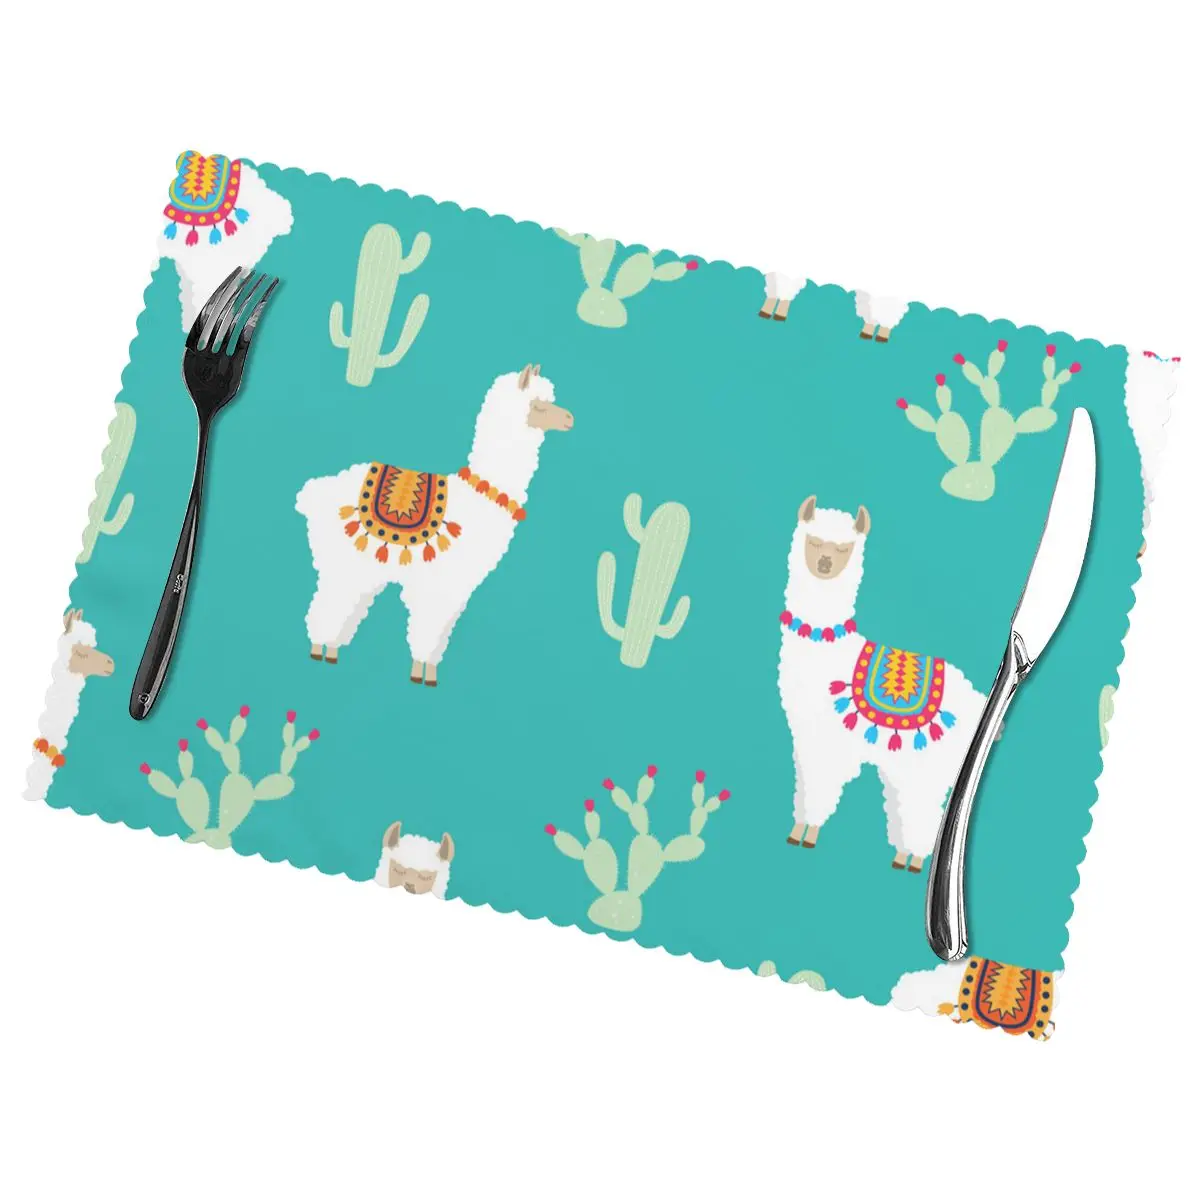 

Llama Alpaca And Cactus Non-Slip Insulation Place Mats for Kitchen Dining Table Washable Placemats Bowl Coaster Cup Mat Set of 6